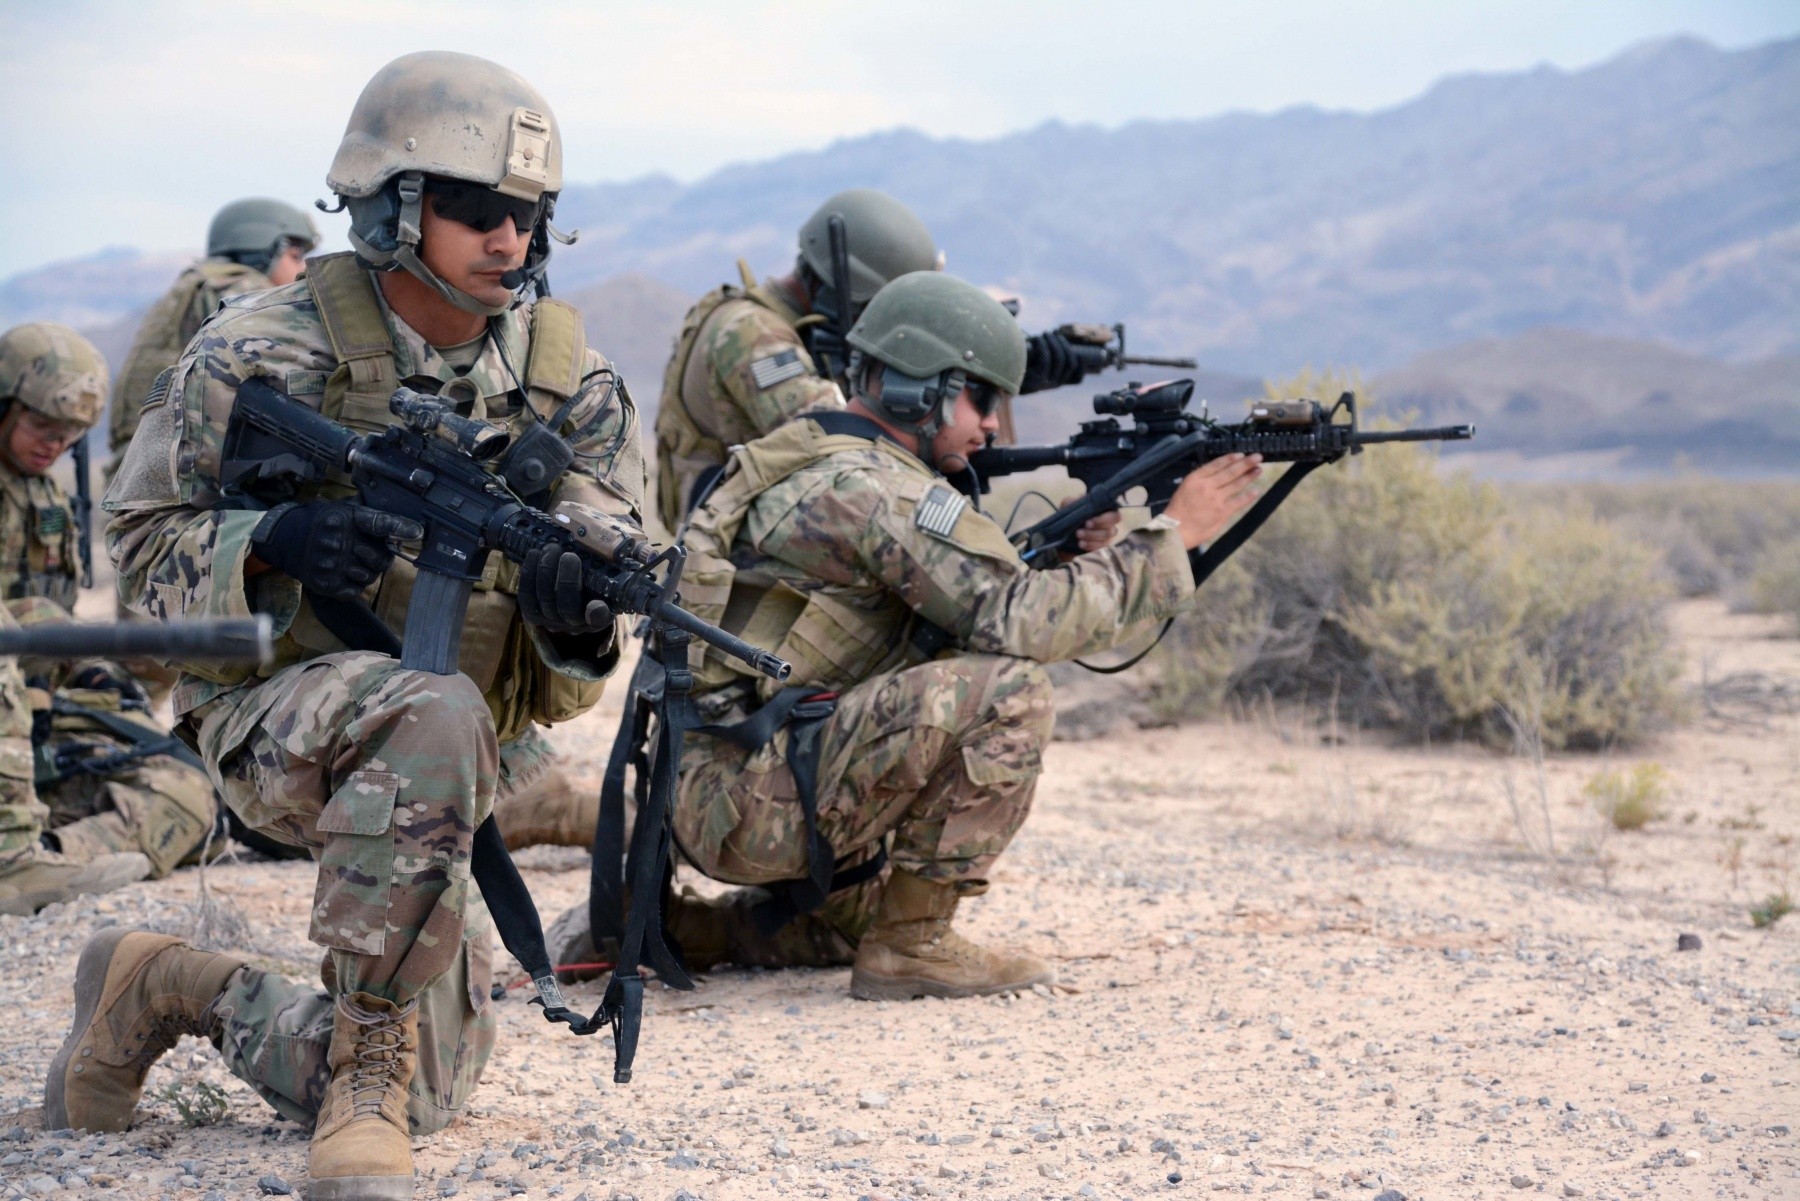 Special Forces train support soldiers in complex fires and maneuvers. Article. The United States Army